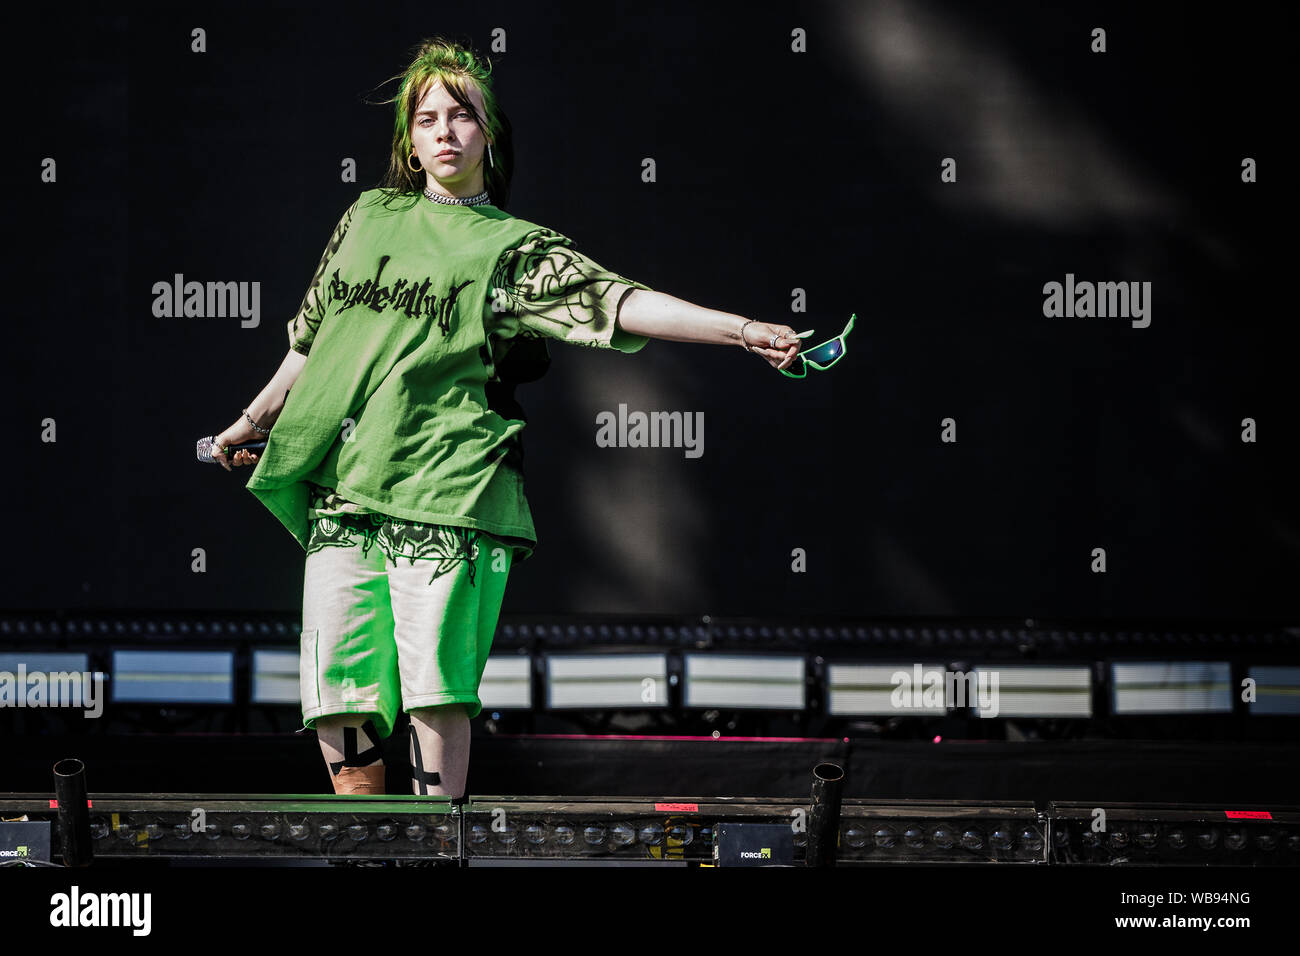 Billie Eilish performs live on stage at Leeds Festival, UK, 25th Aug, 2019. Stock Photo